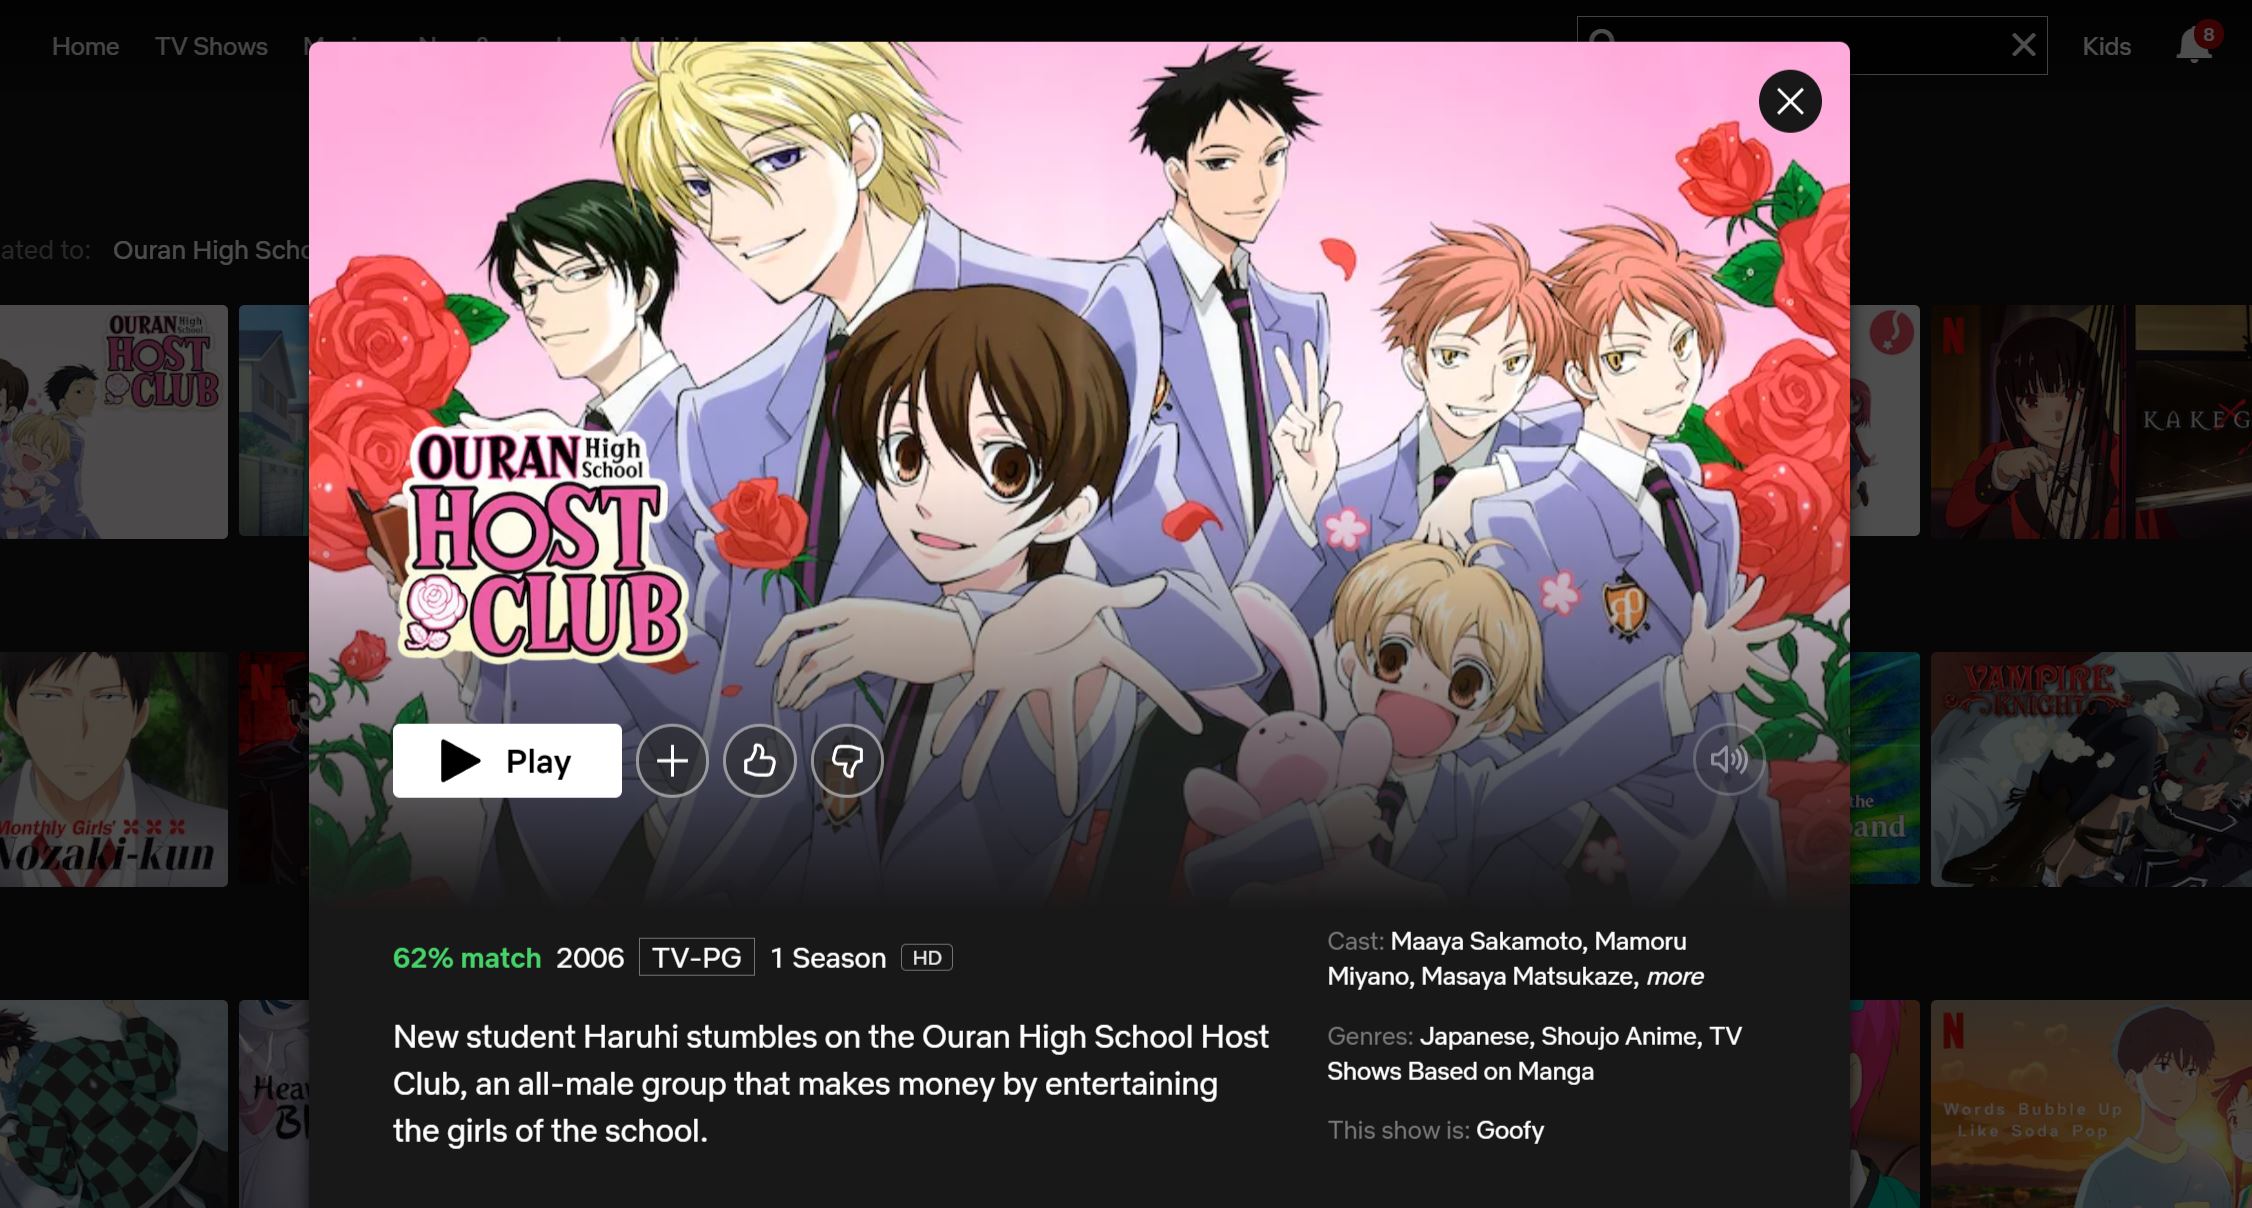 How To Watch Ouran High School Host Club On Netflix In 2022